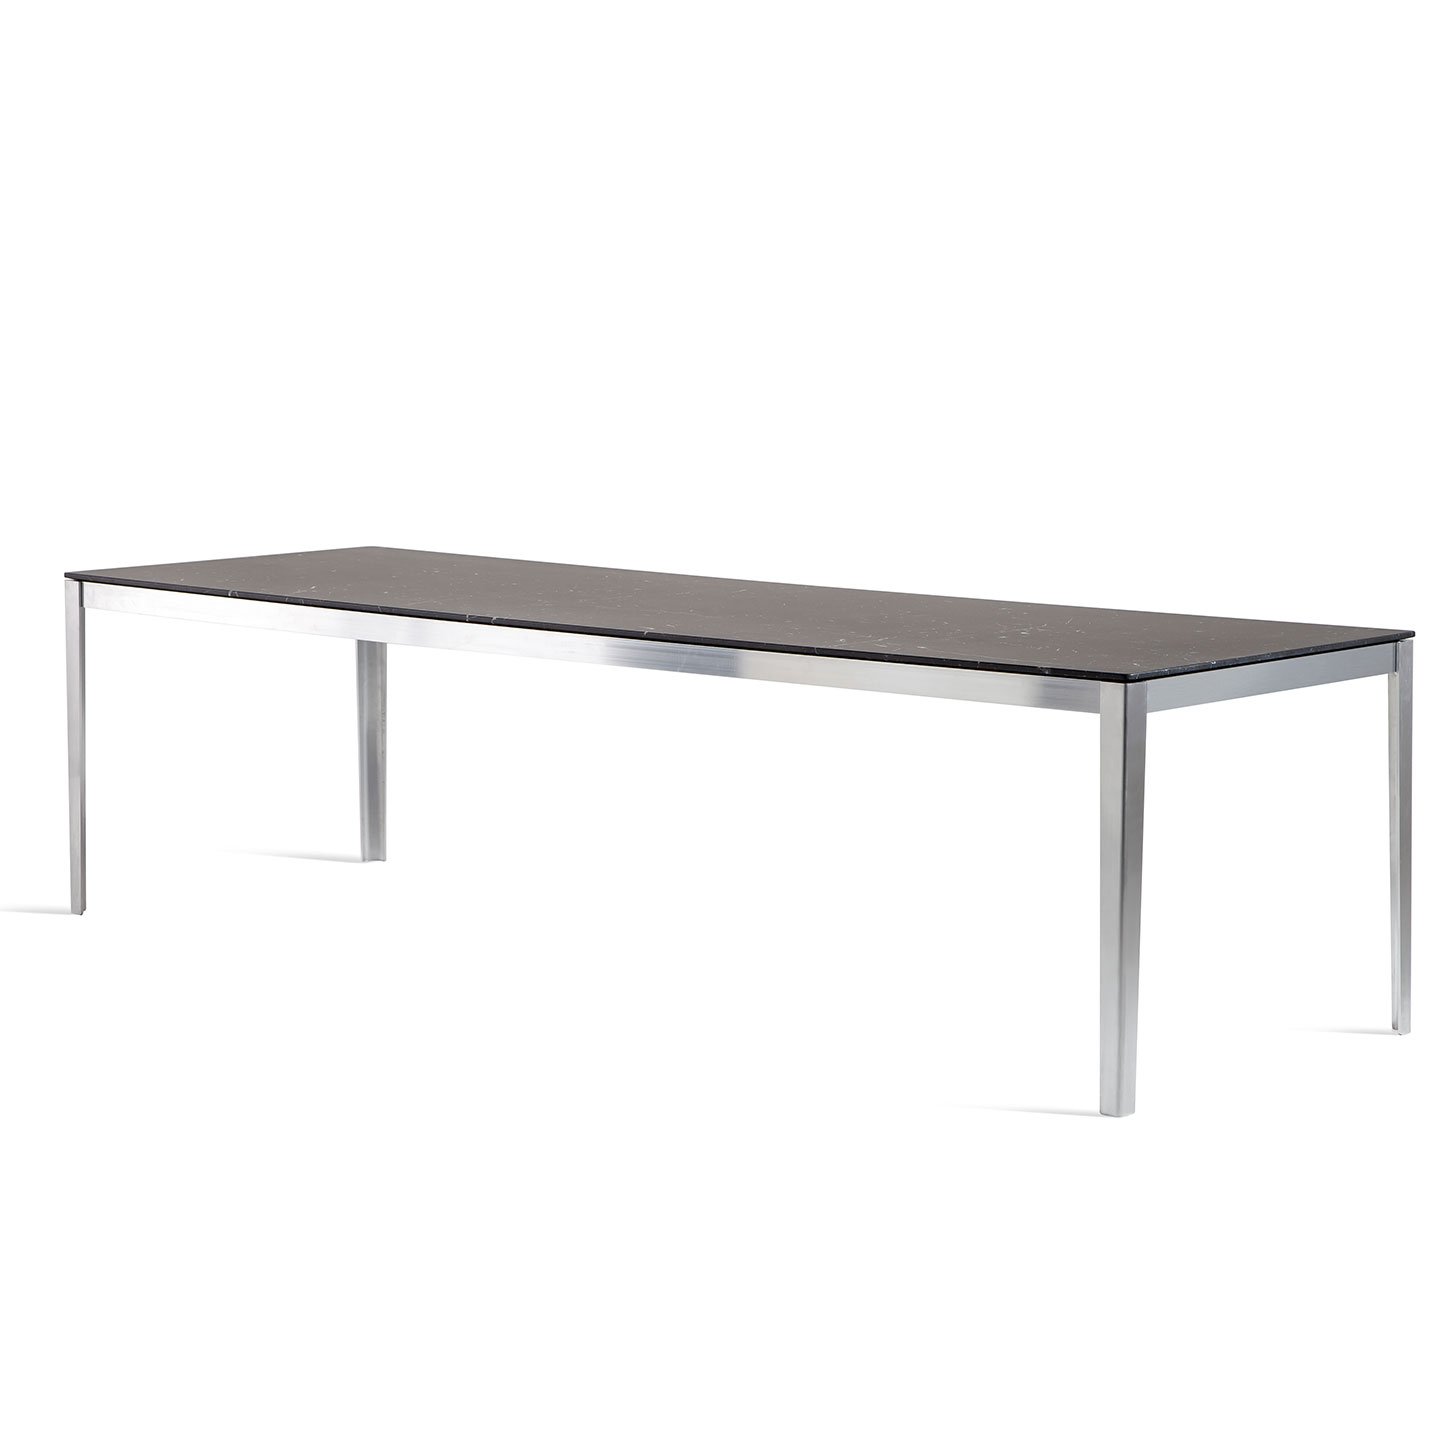 Haworth Cotone table 4 metal legs with rectangular solid surface top